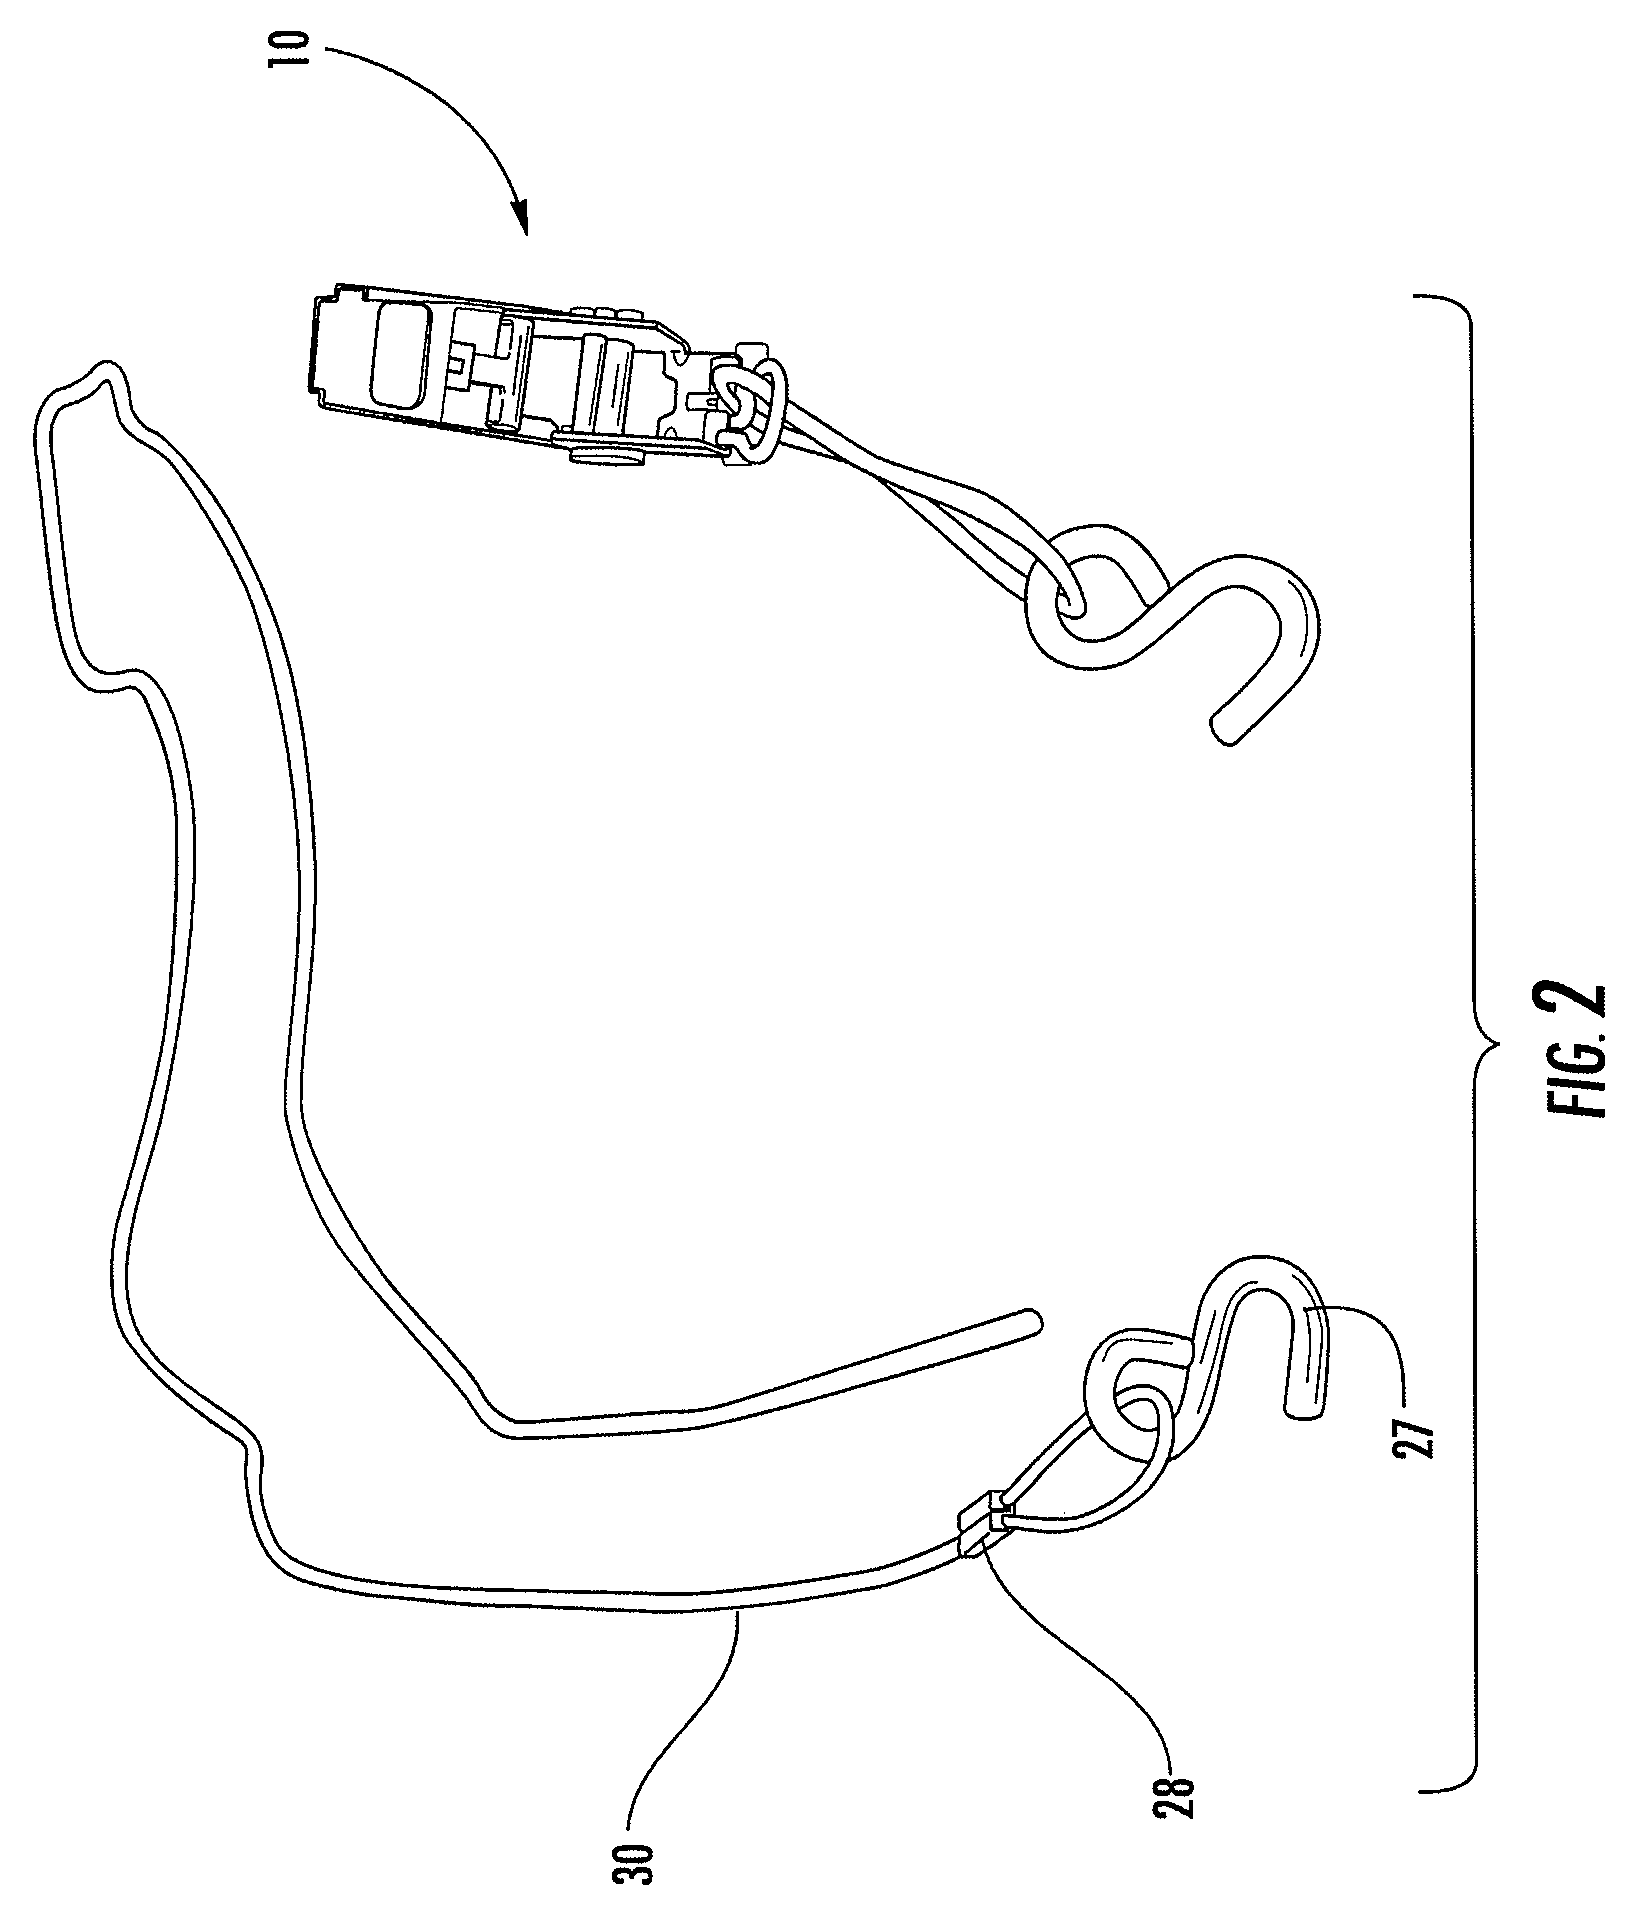 Tree stand lock apparatus and method of use